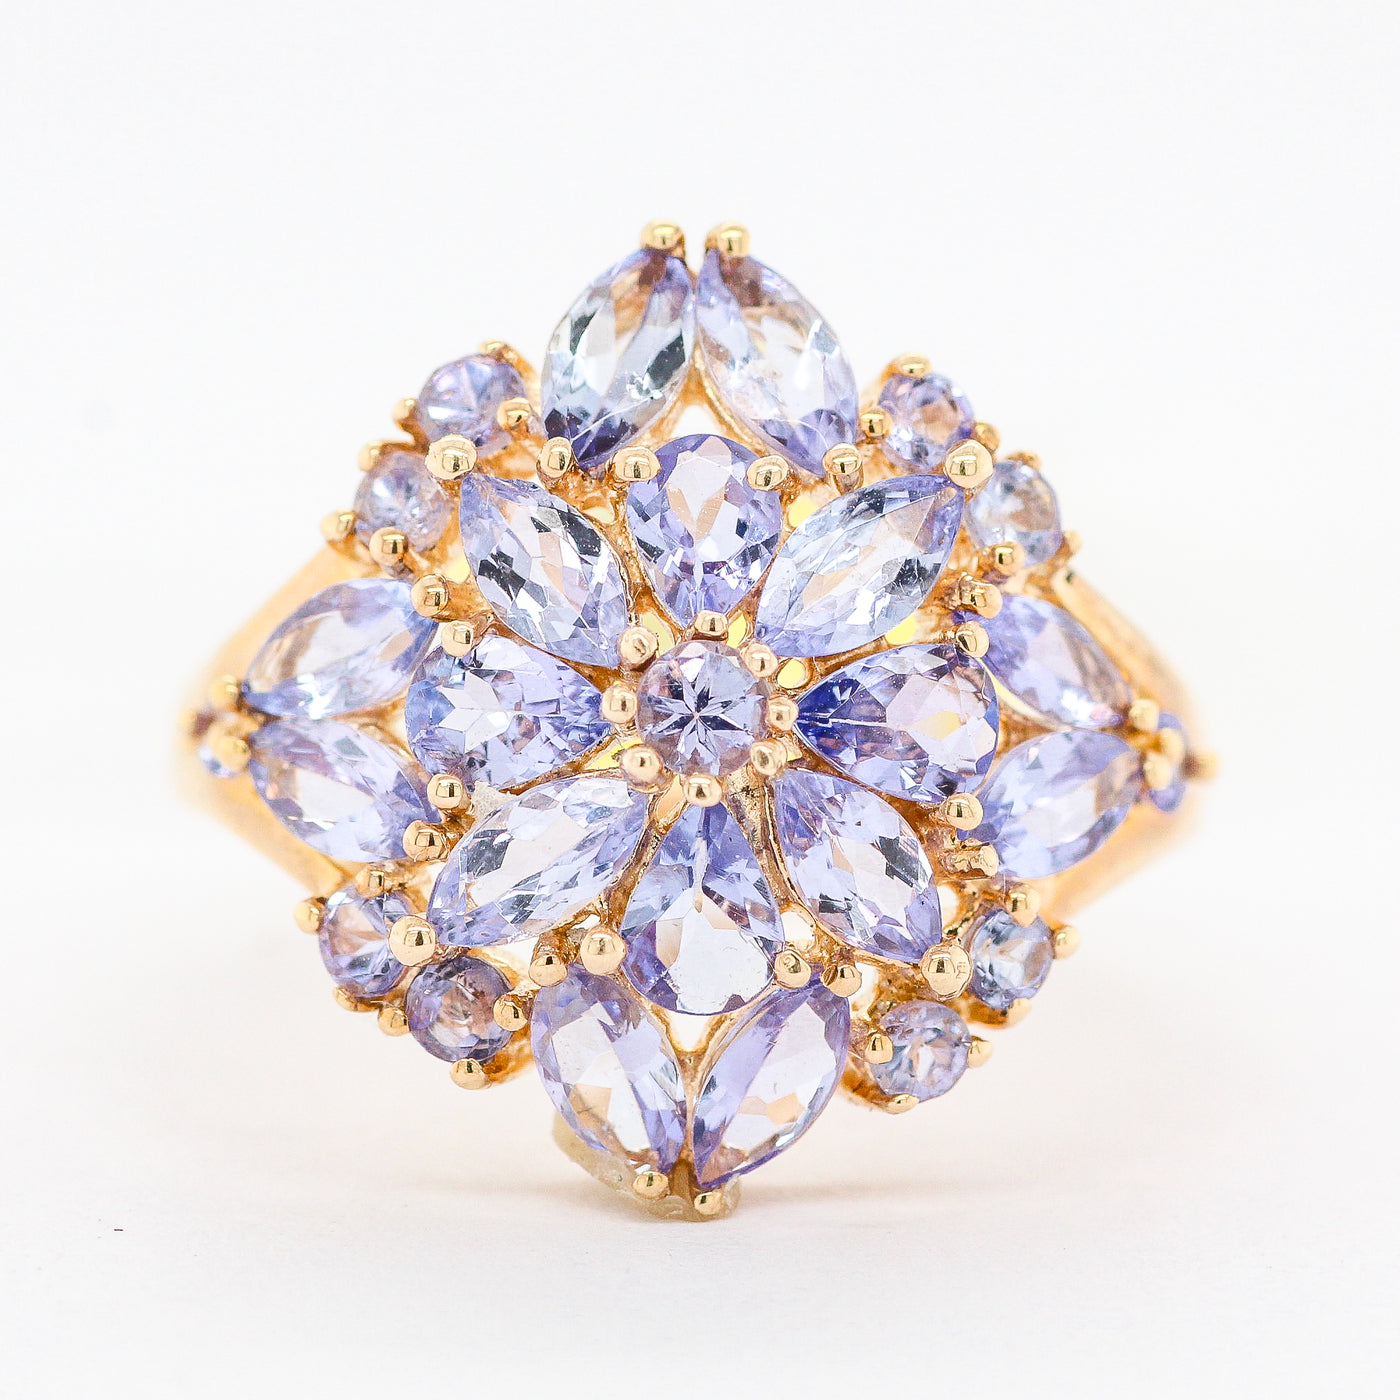 10KY 1.50 CTTW IOLITE RING